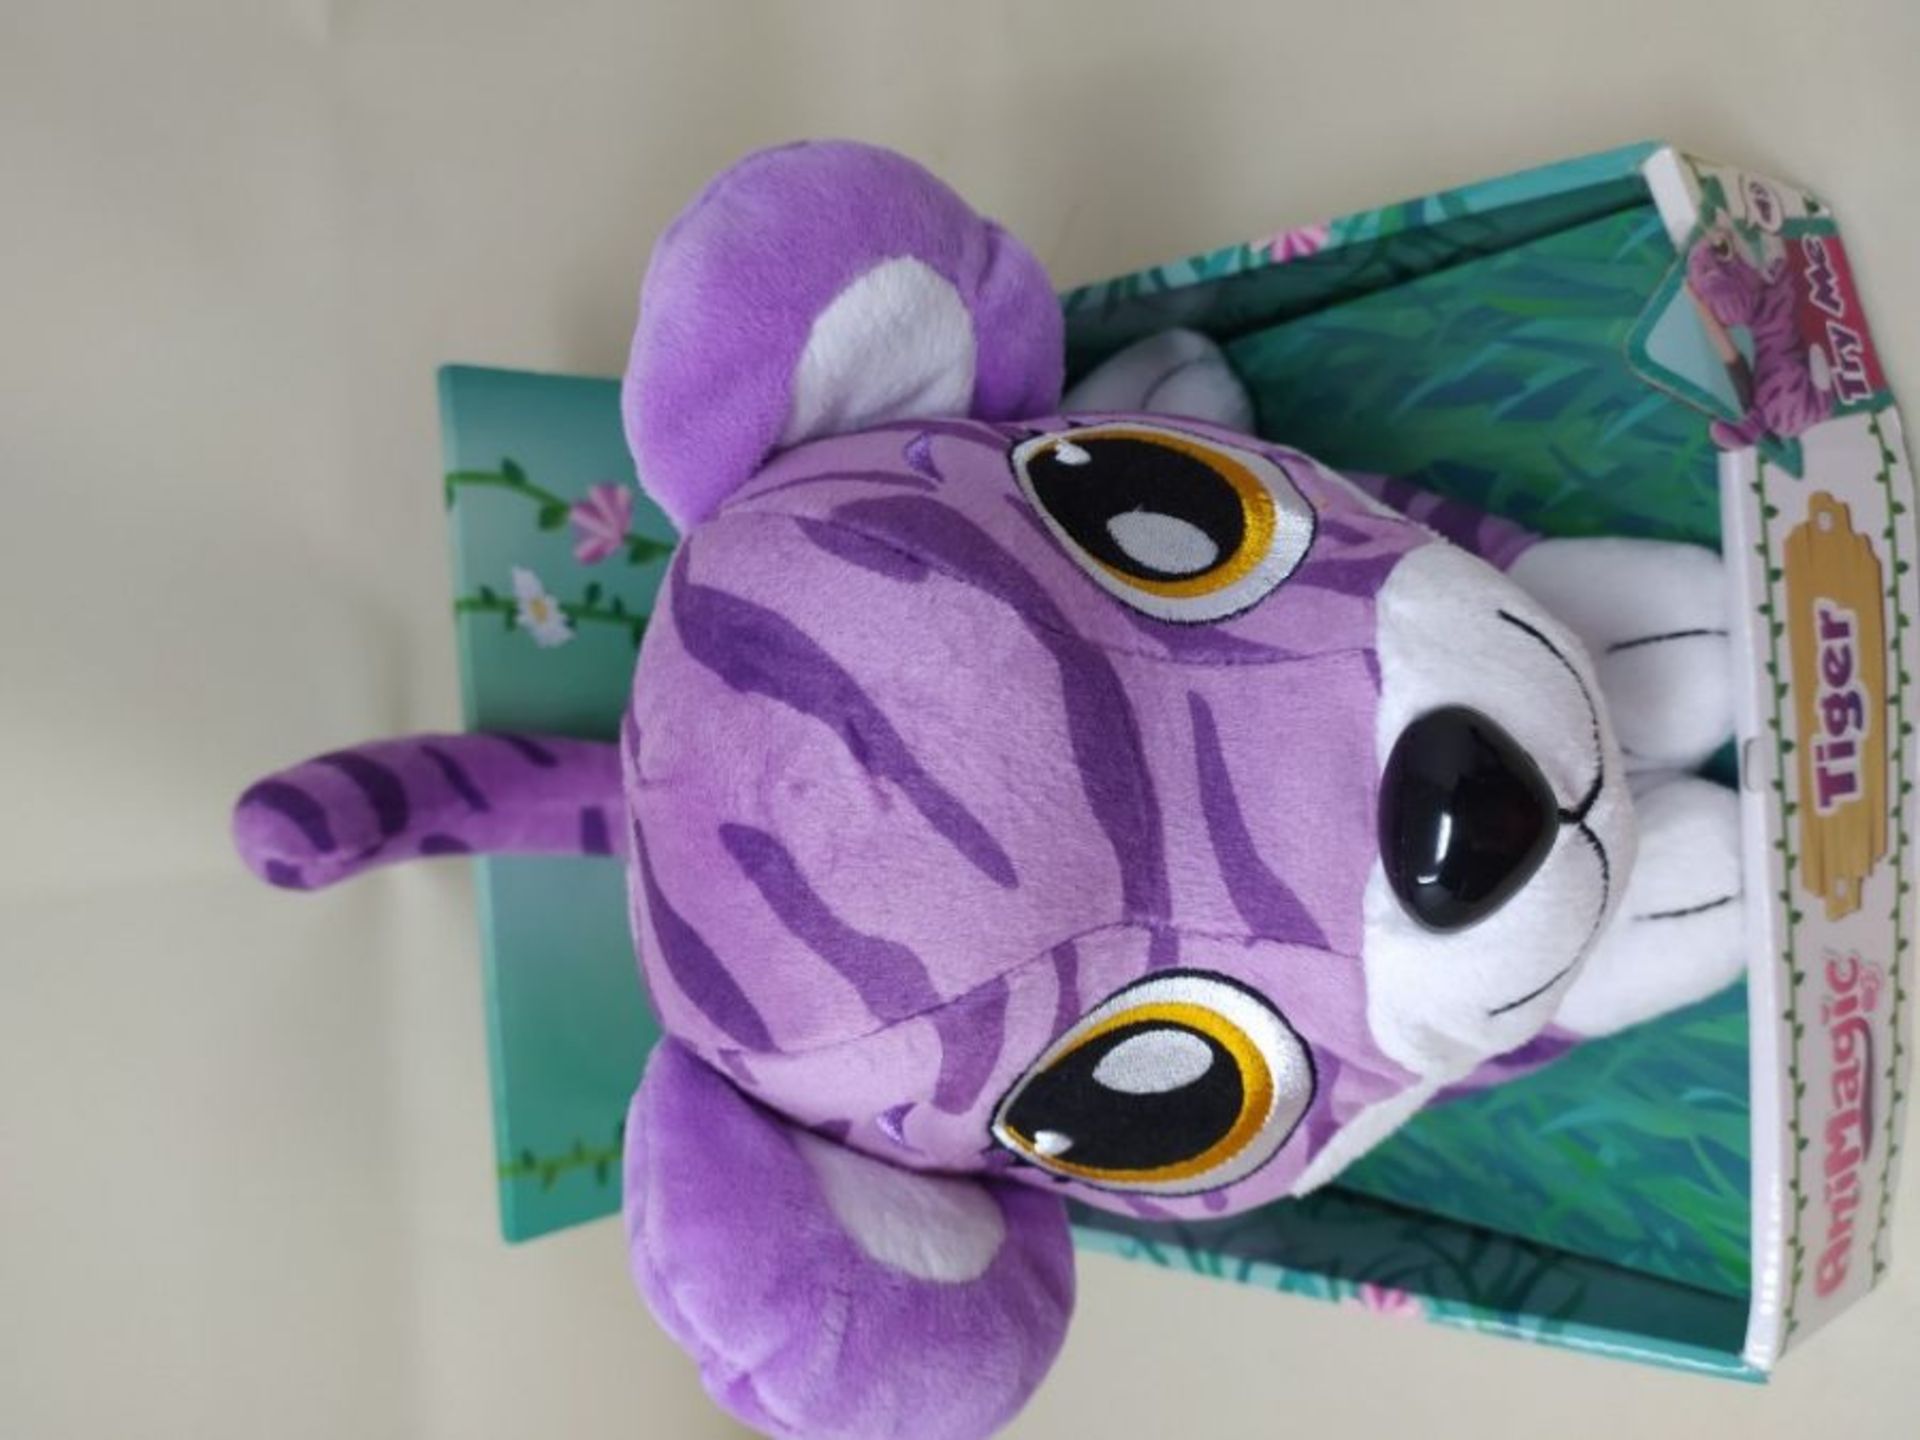 Animagic Plush Soft Toy for Kids with Sounds and Light up - Image 2 of 2